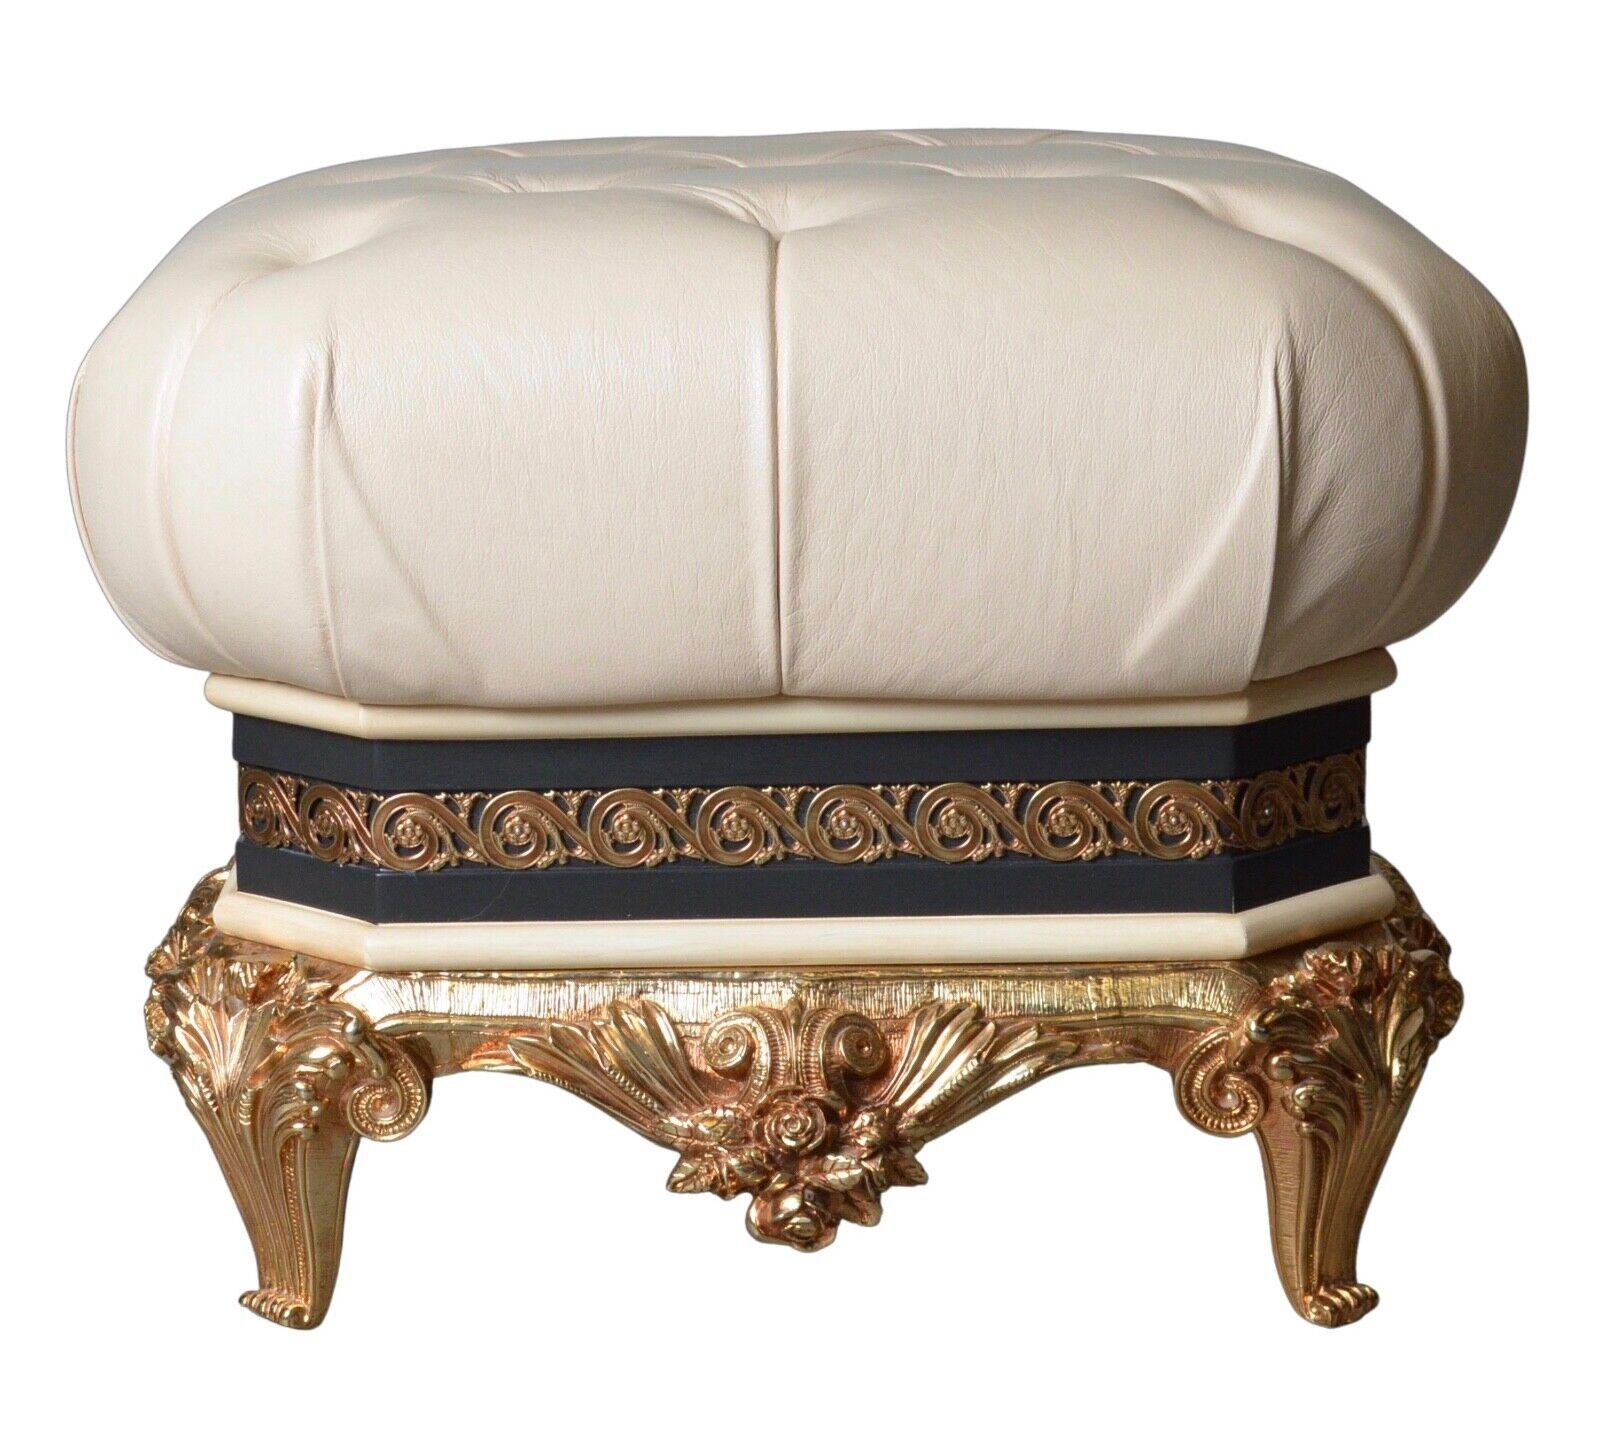 Spanish Exclusive circa 1970 Rococo Vidal Grau Footstool, Matching Furniture Available For Sale